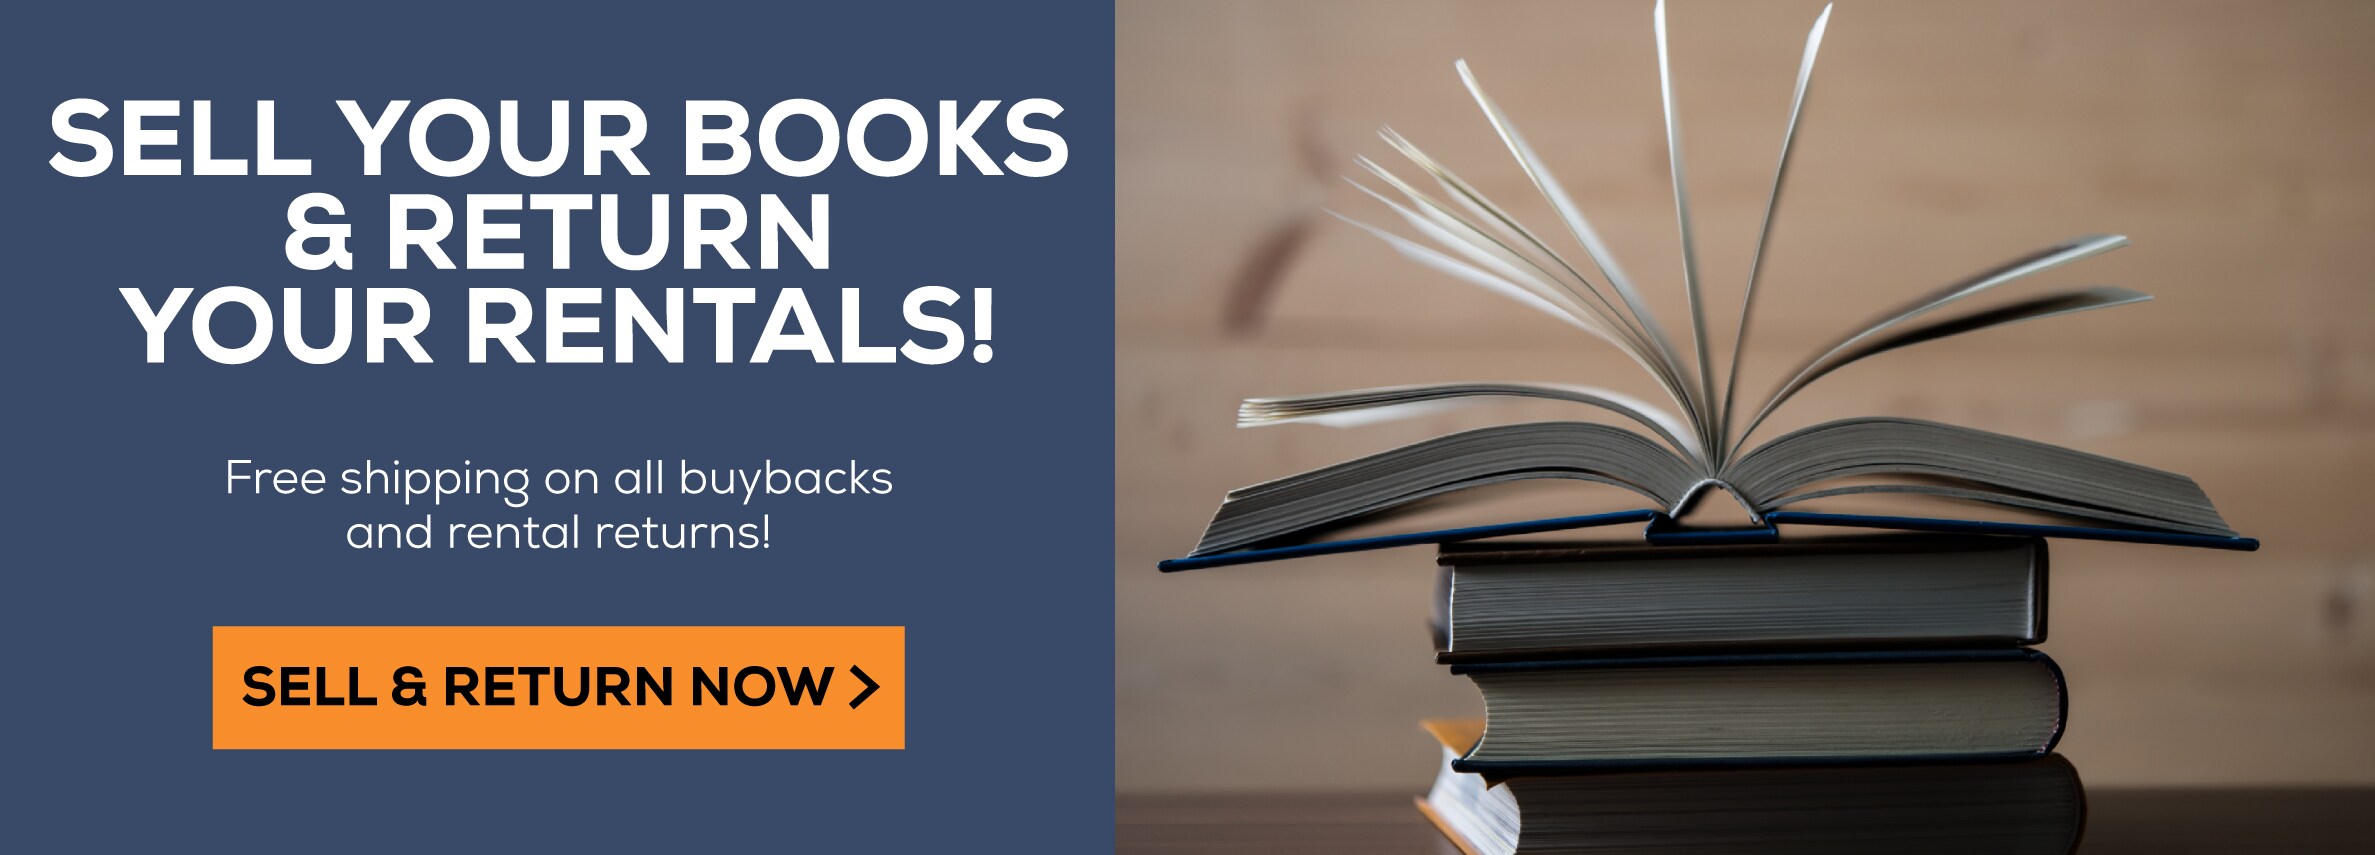 Sell your books and return your rentals online! Free shipping on all buybacks and rental returns. Sell and return now.